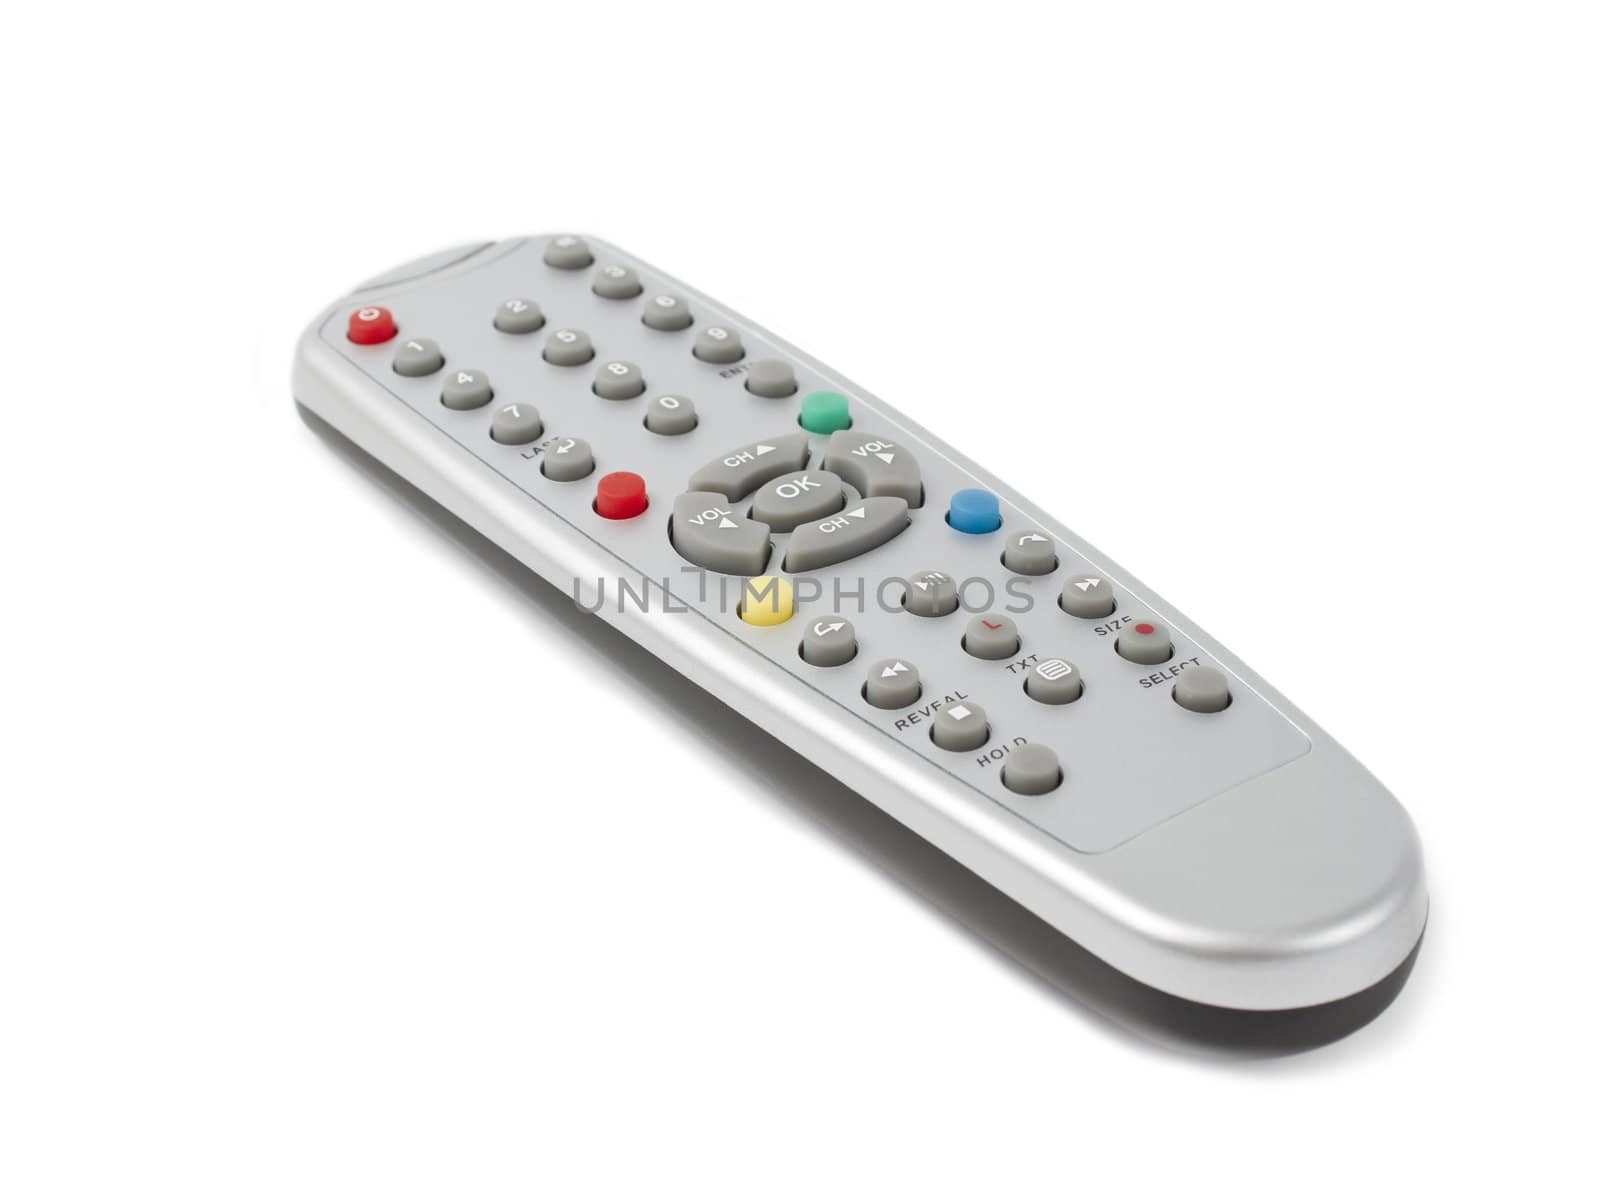 plastic remote control with colored buttons. The control is used for a television.